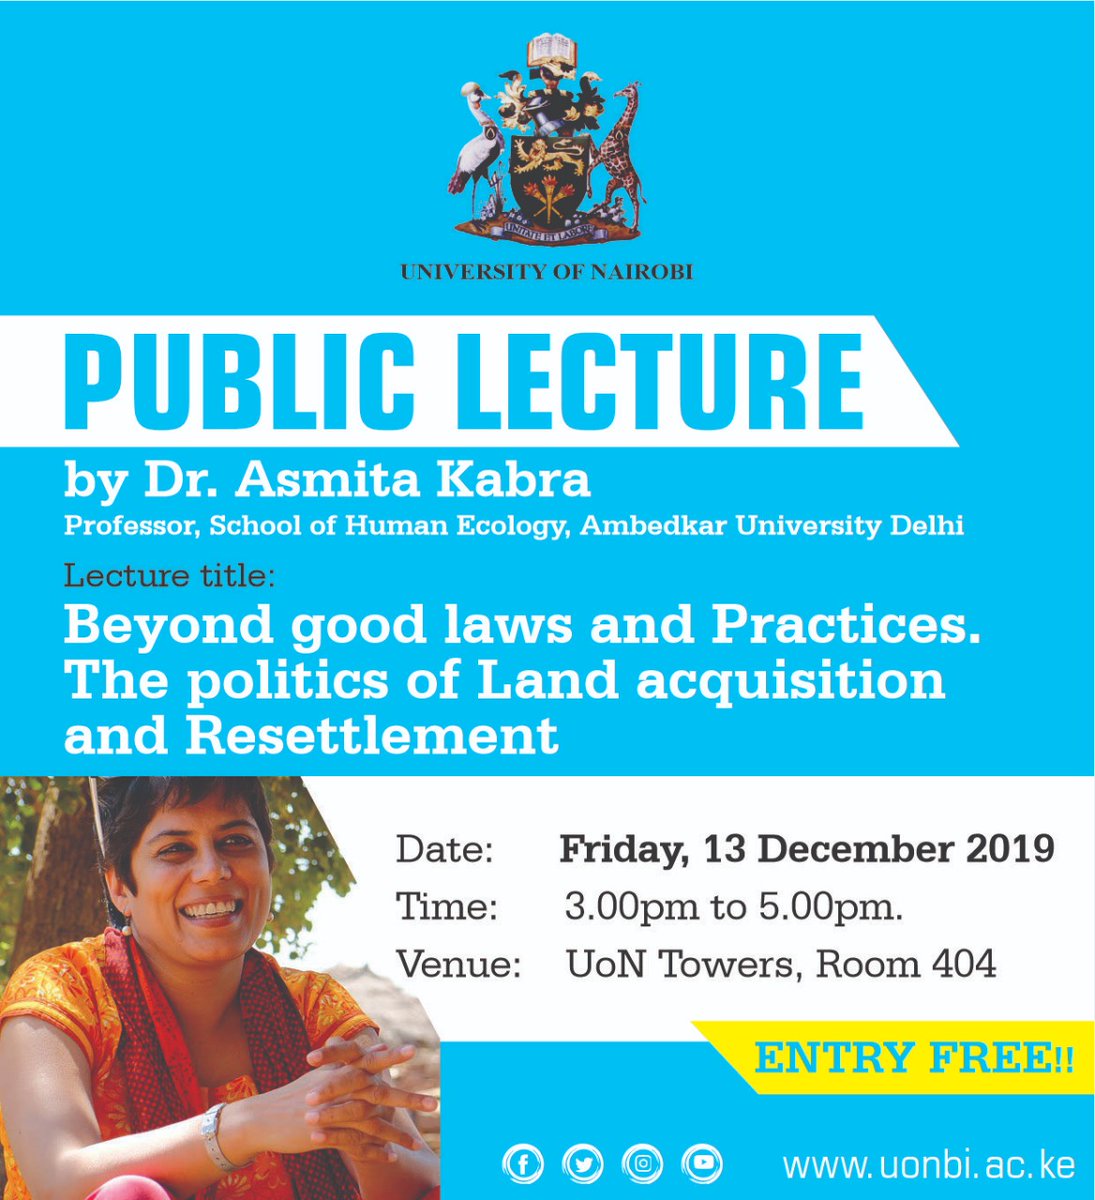 An invitation to a public lecture on 'Beyond Good Laws & Practices